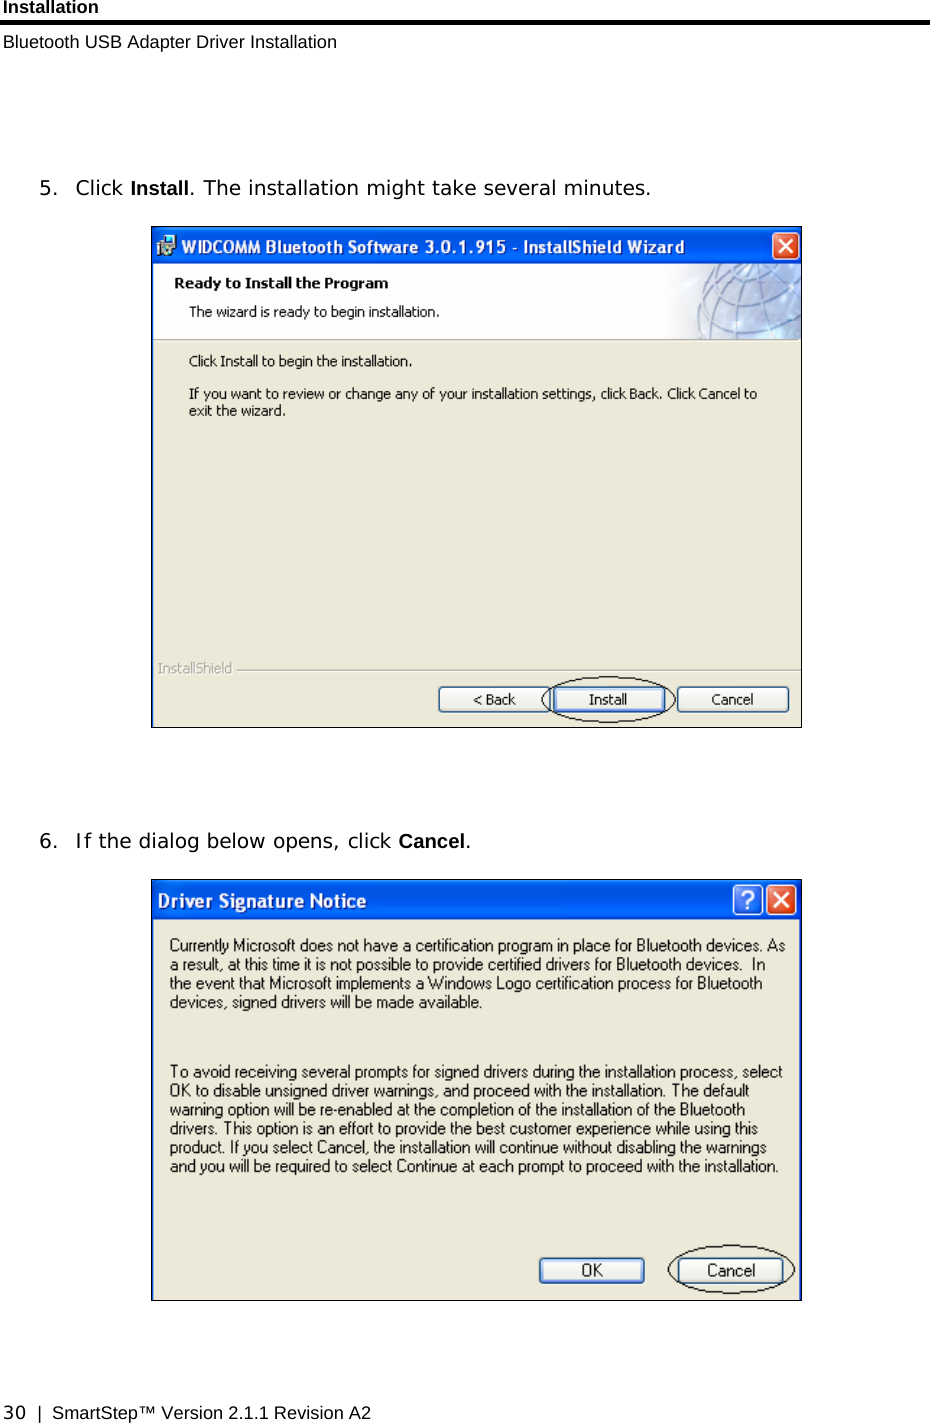 Installation Bluetooth USB Adapter Driver Installation  30  |  SmartStep™ Version 2.1.1 Revision A2    5. Click Install. The installation might take several minutes.      6. If the dialog below opens, click Cancel.     